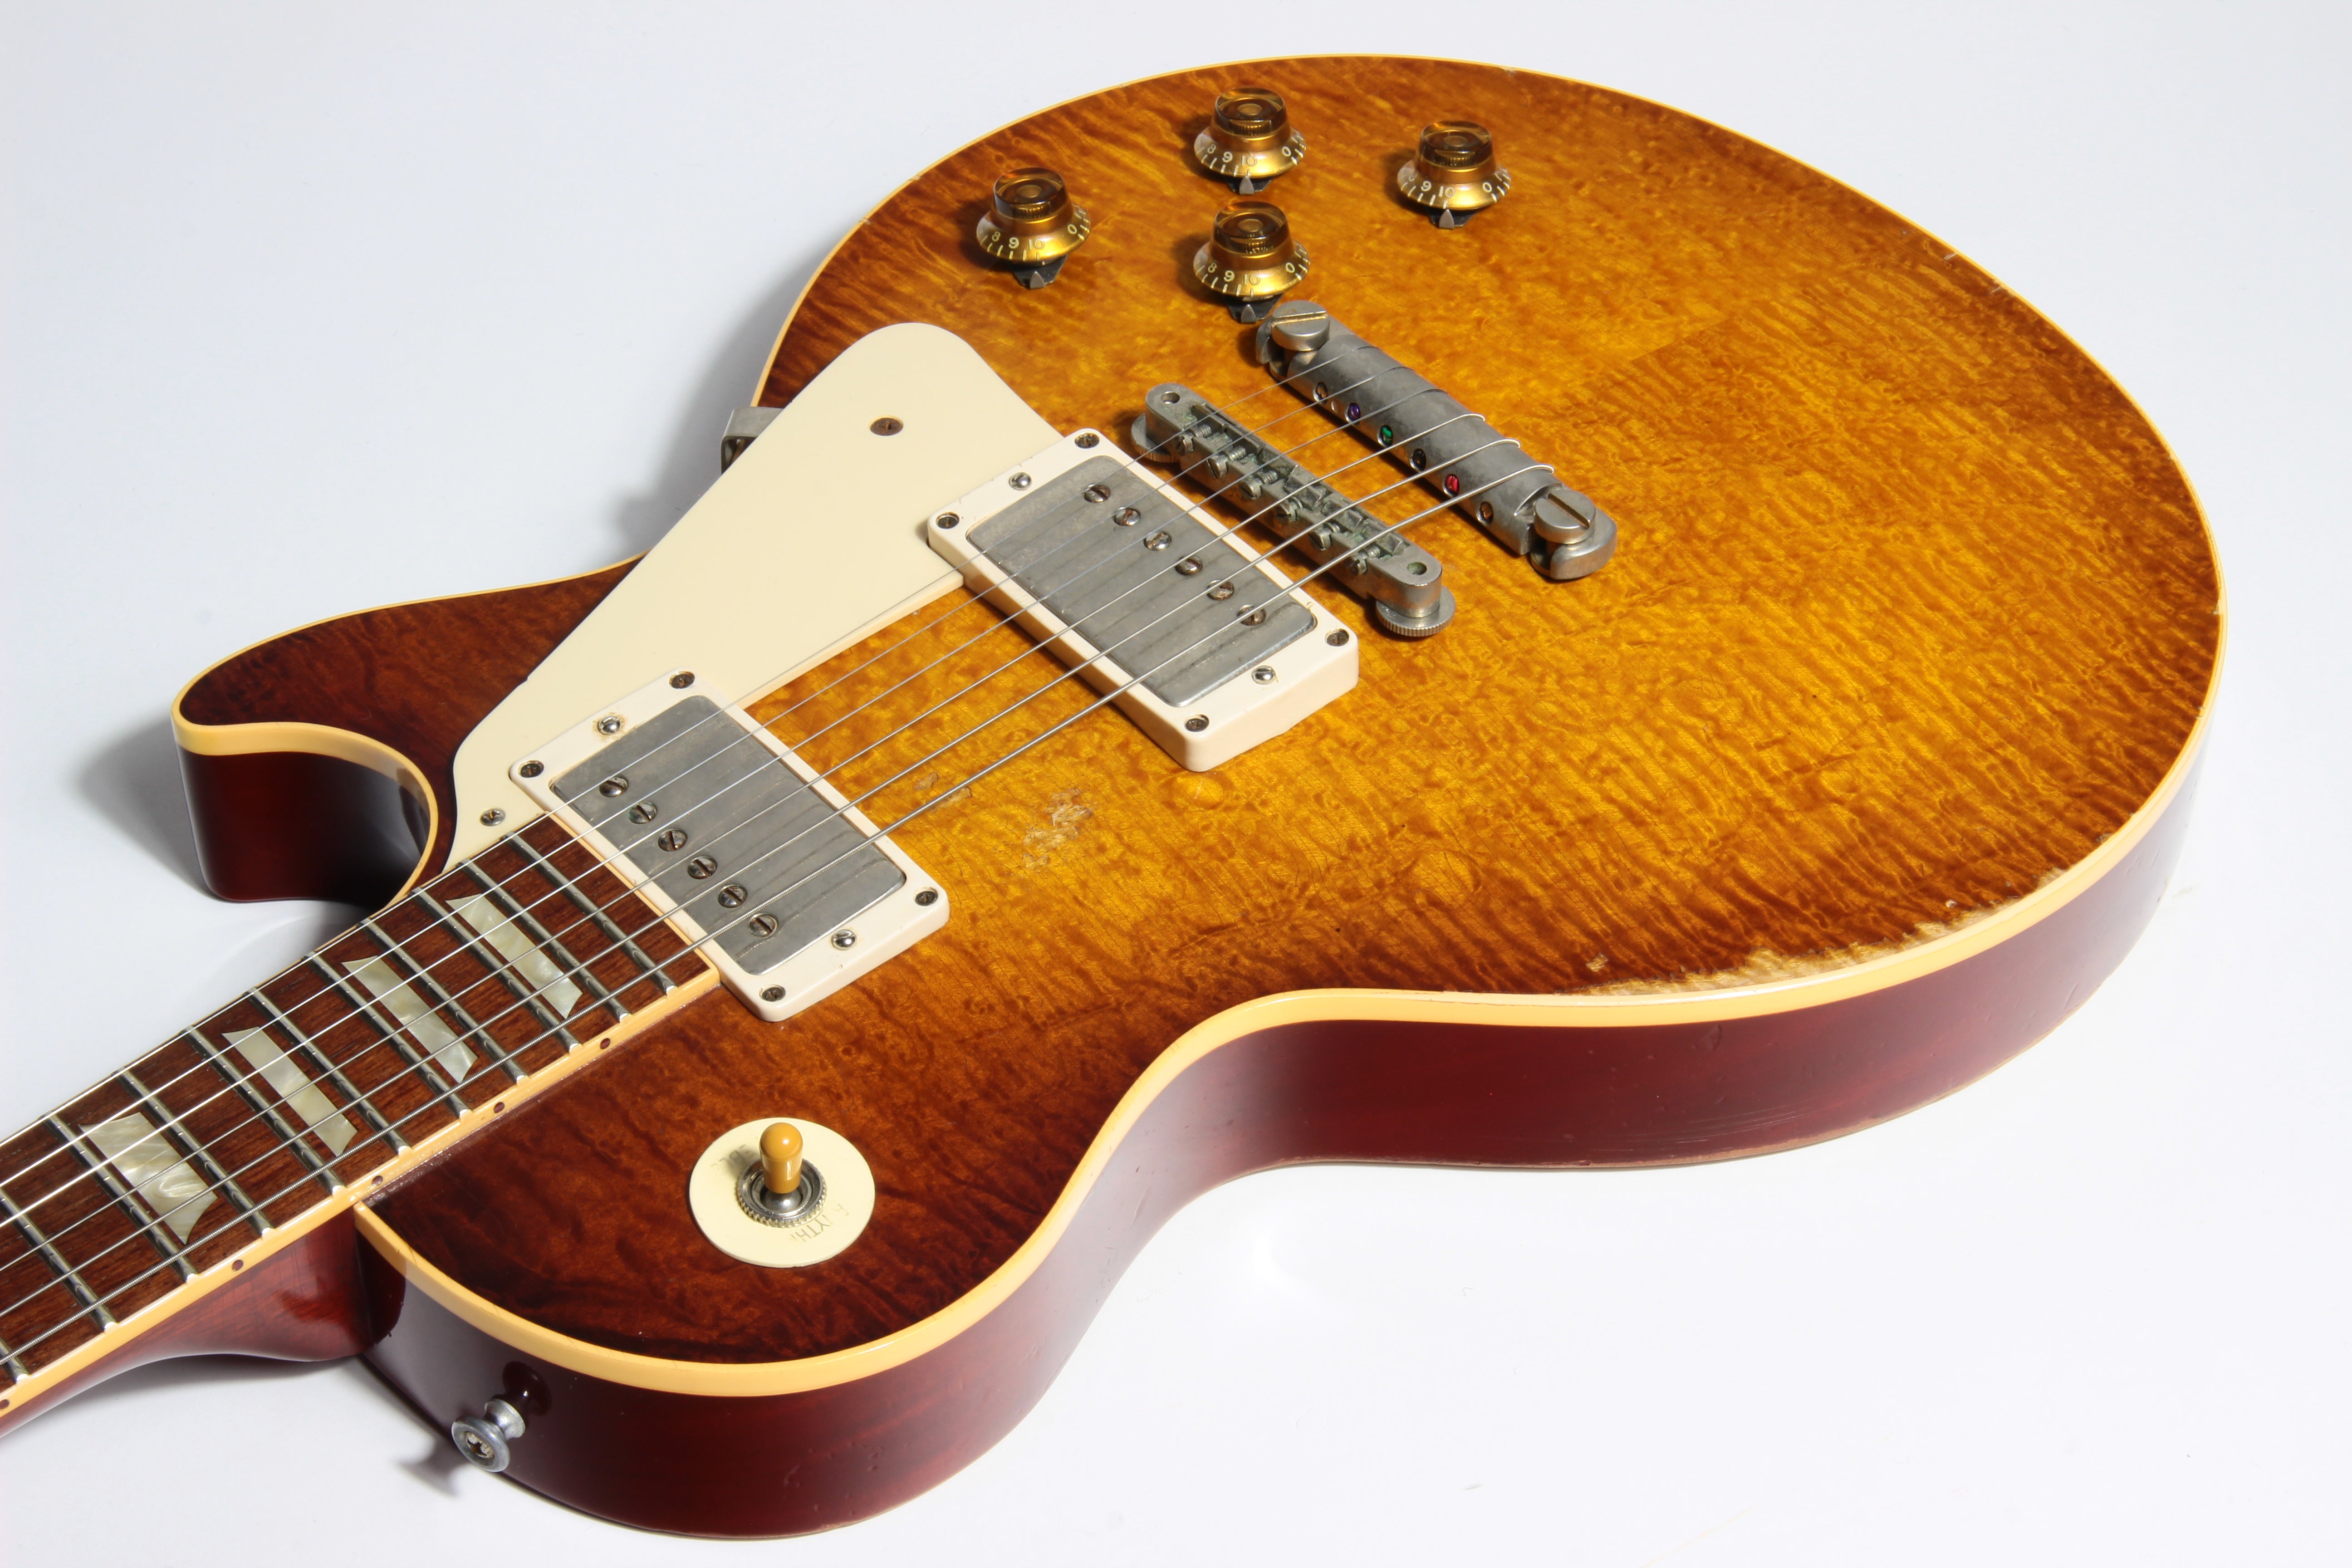 *SOLD*  2009 Gibson PEARLY GATES MURPHY AGED 1959 Les Paul! Billy Gibbons Custom Shop 59 - Signed COA